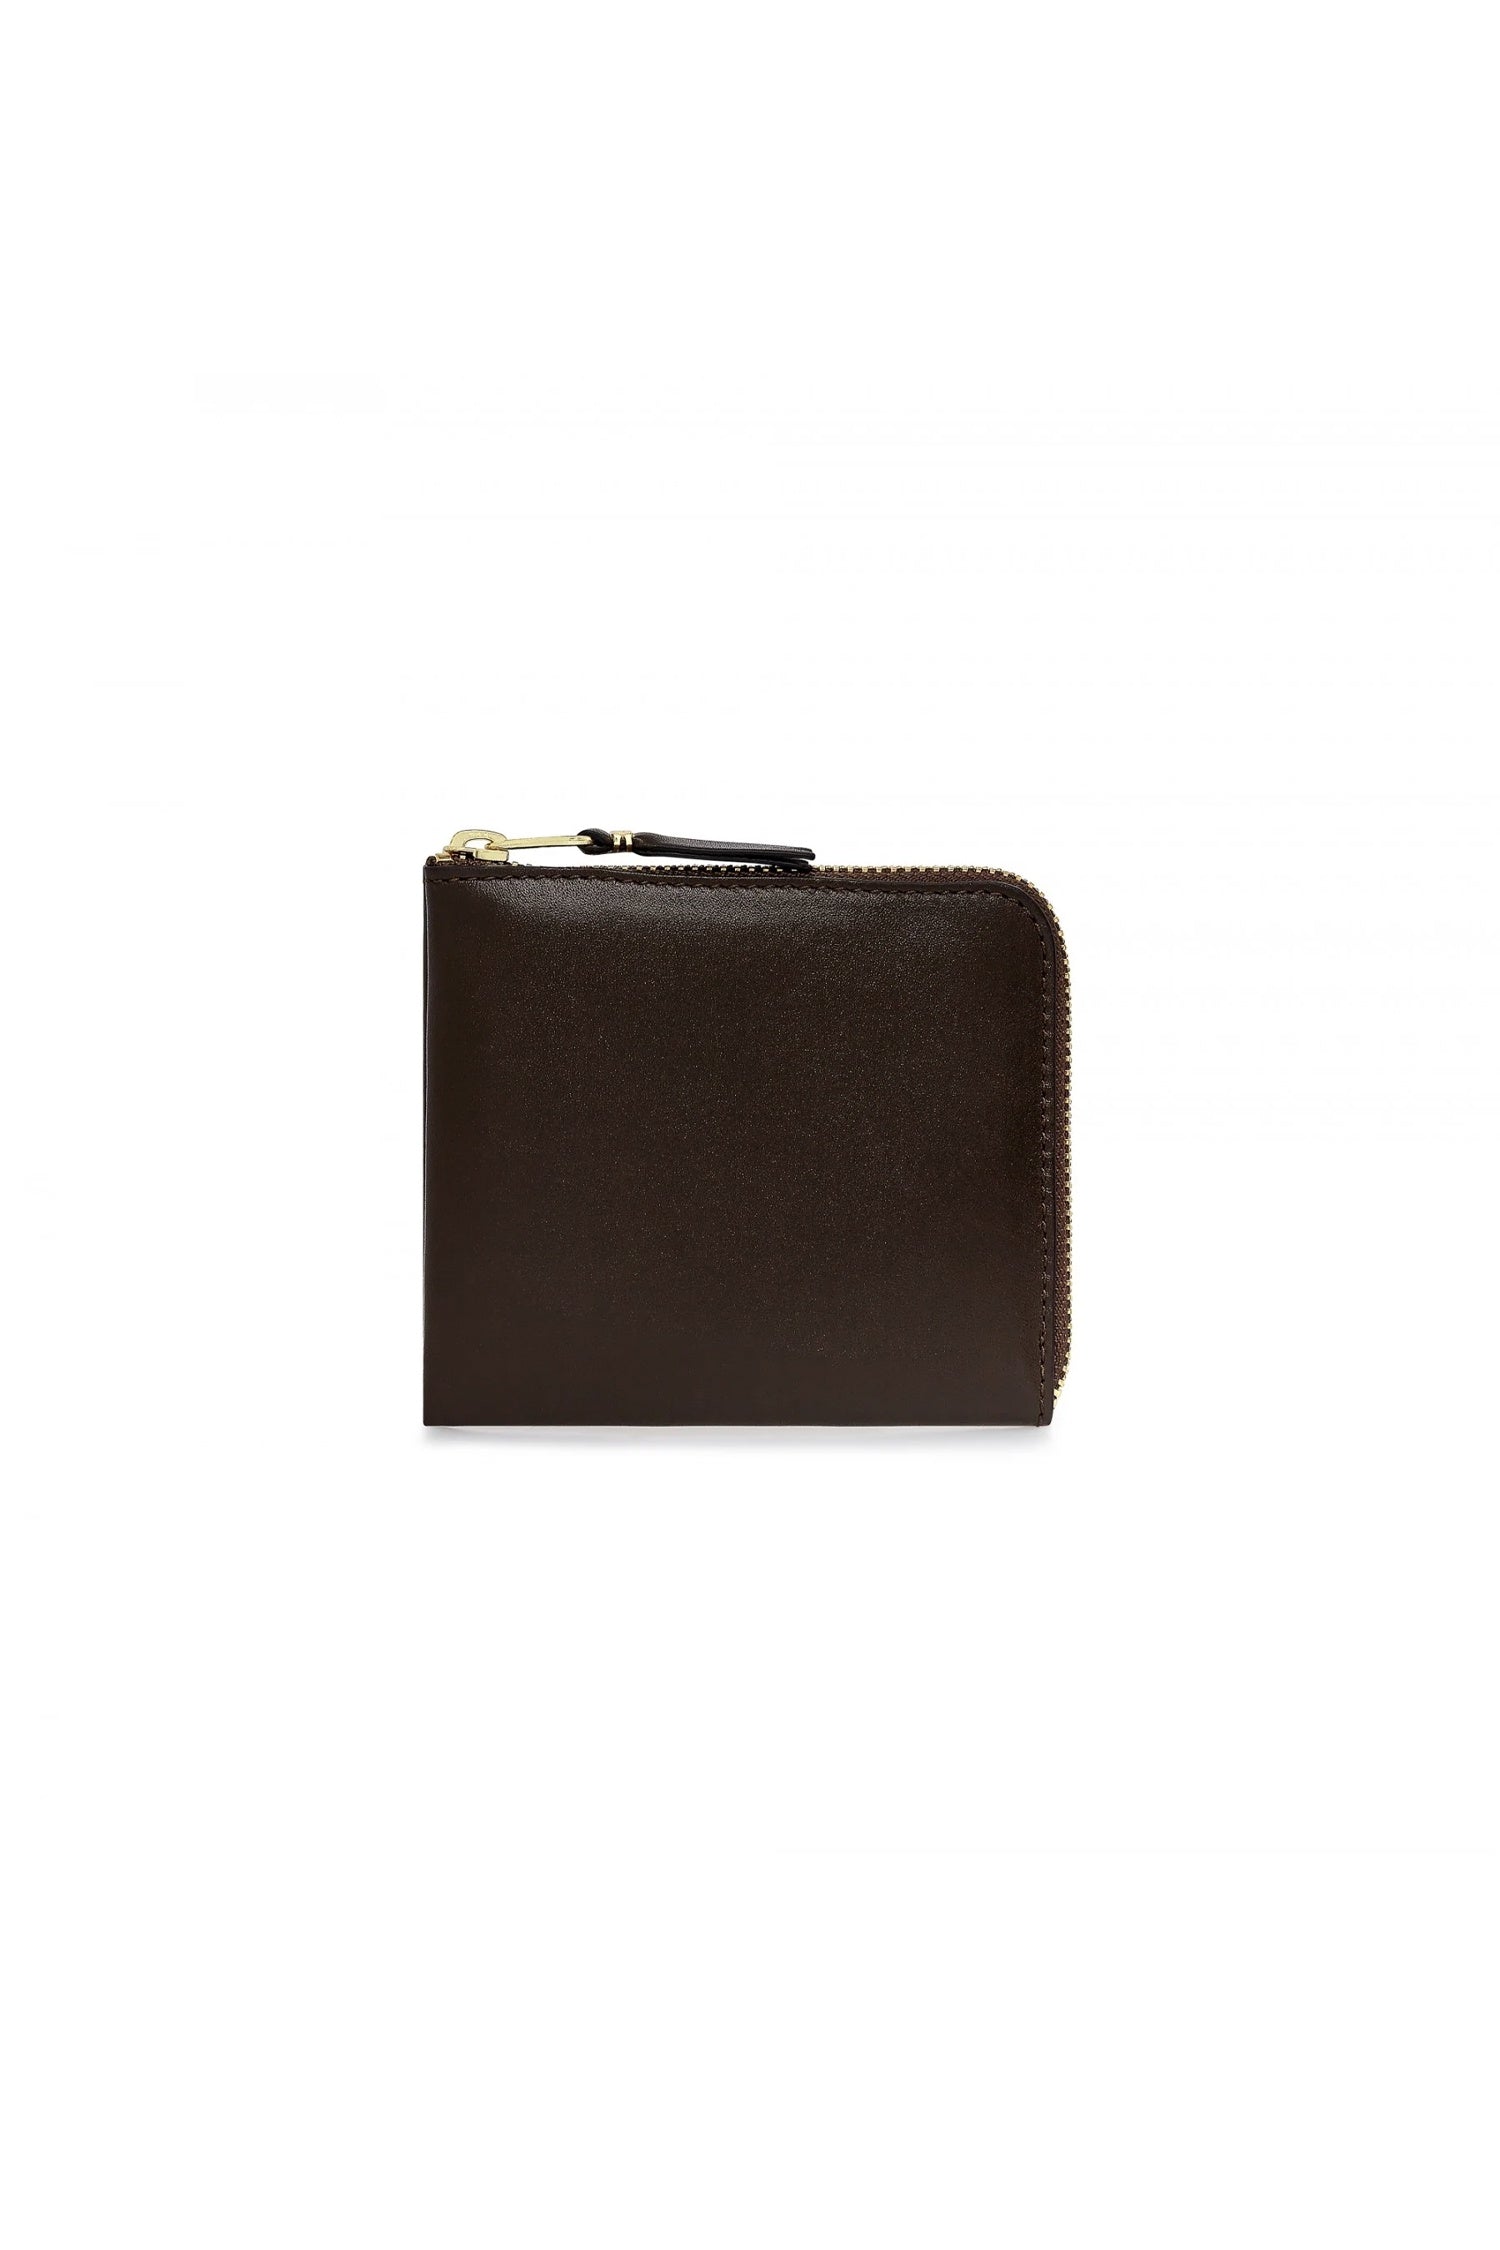 CLASSIC GROUP COMPACT WALLET IN BROWN, W24